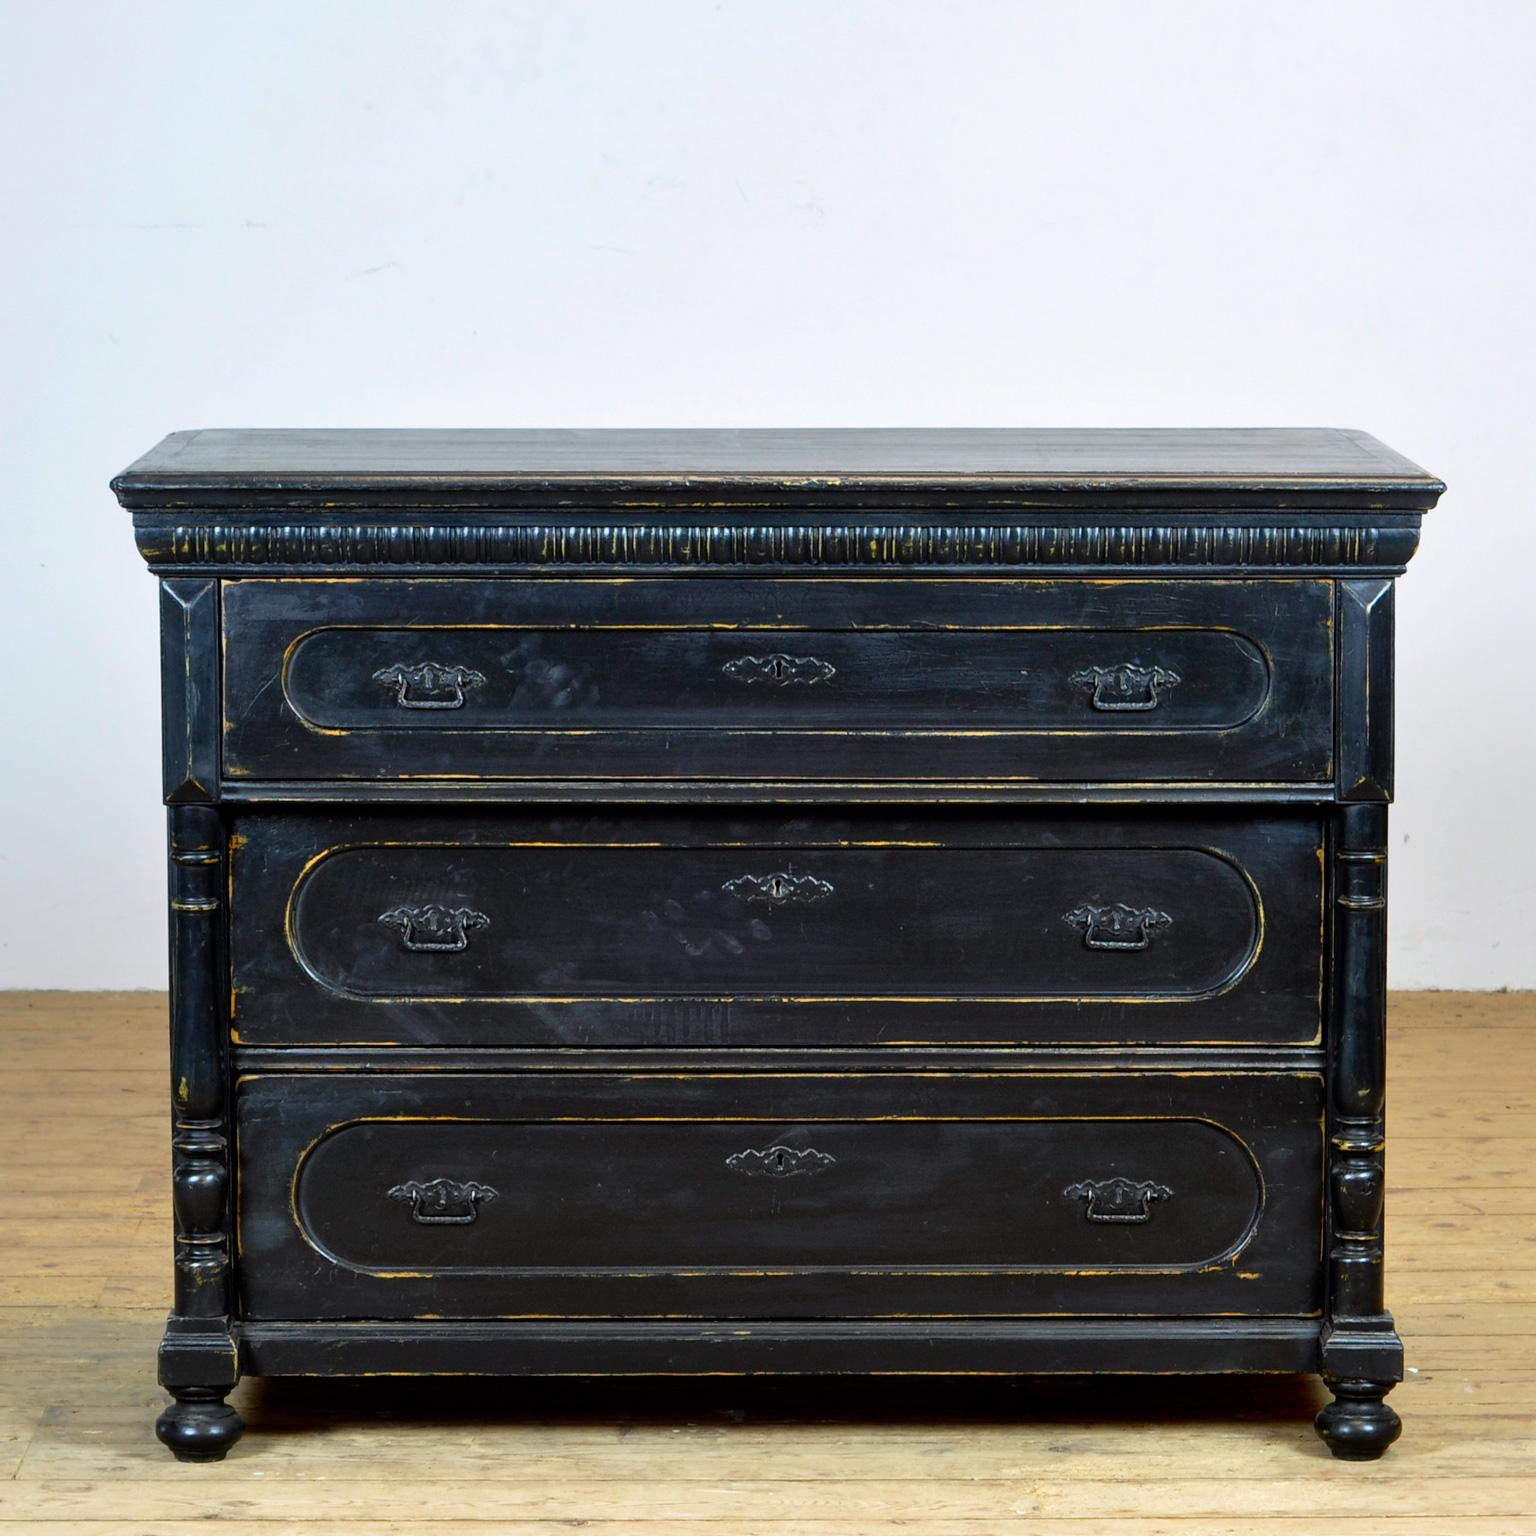 A particularly large and well-built chest of drawers with three drawers. The cabinet comes from Eastern Europe and was made around 1925. The quality of antique pine doesn't get much better than this. The cabinet has 3 drawers with the original